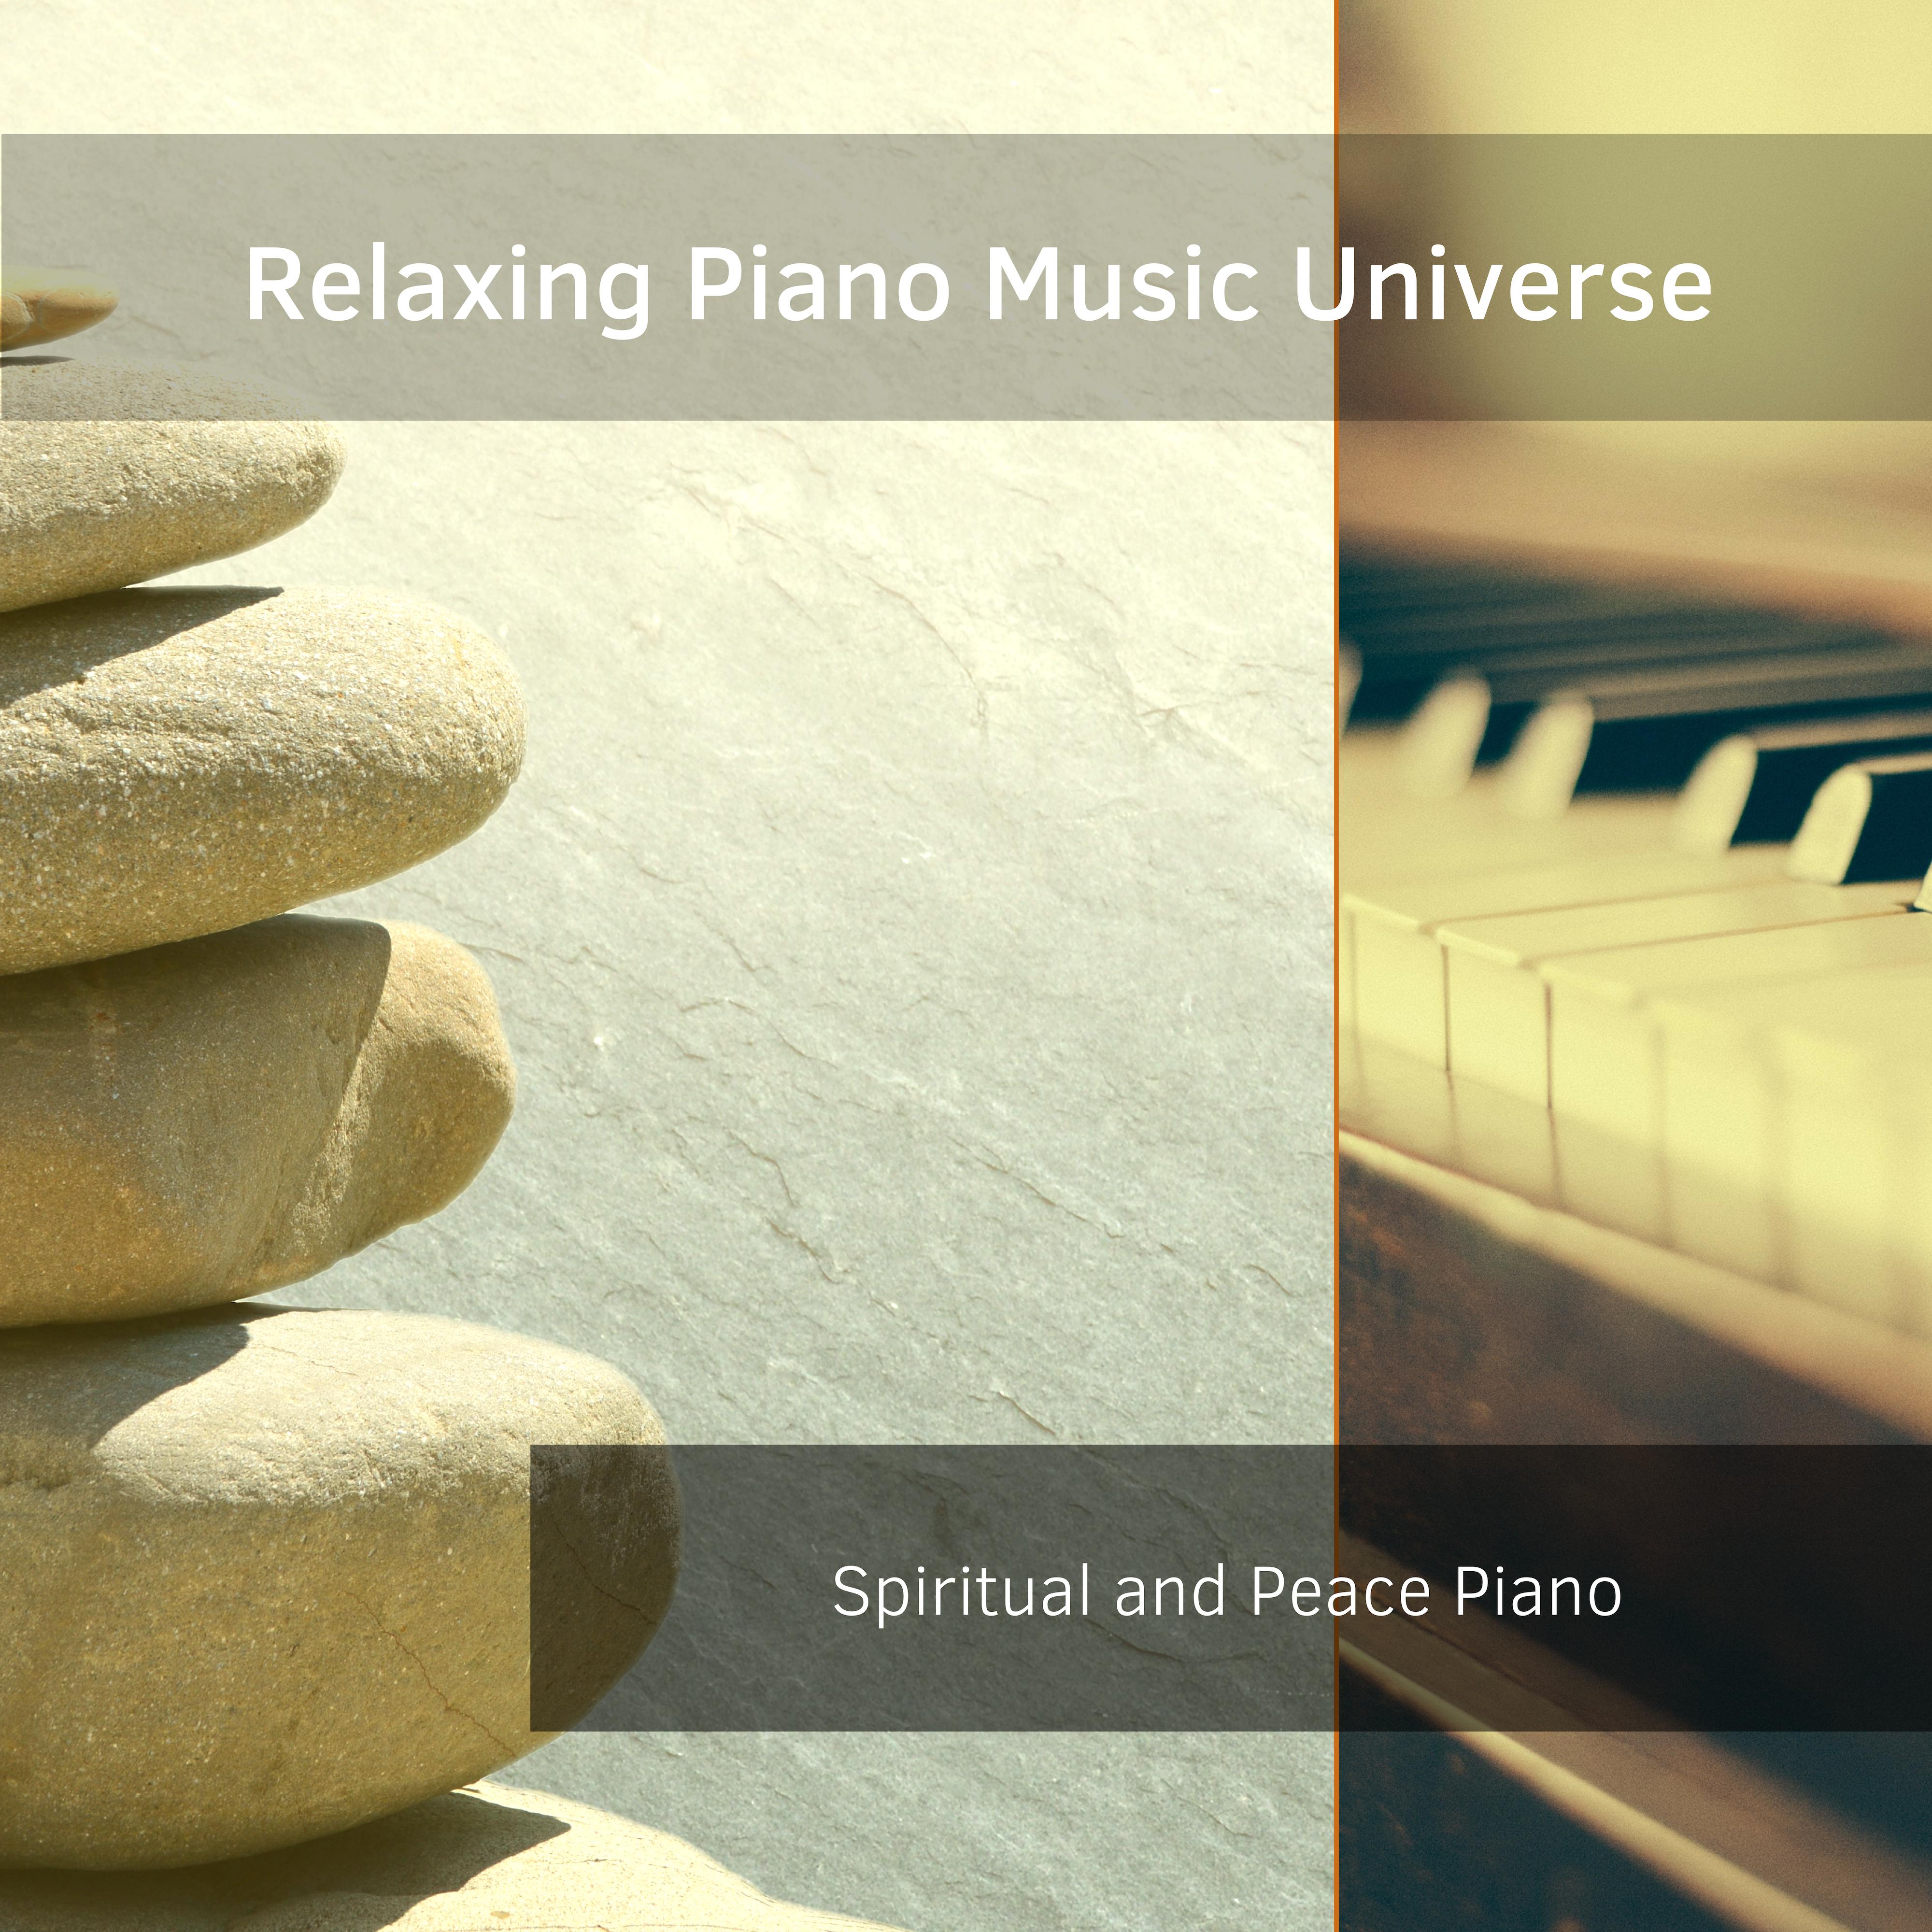 Ideal Instrumental Music for Spiritual Peace